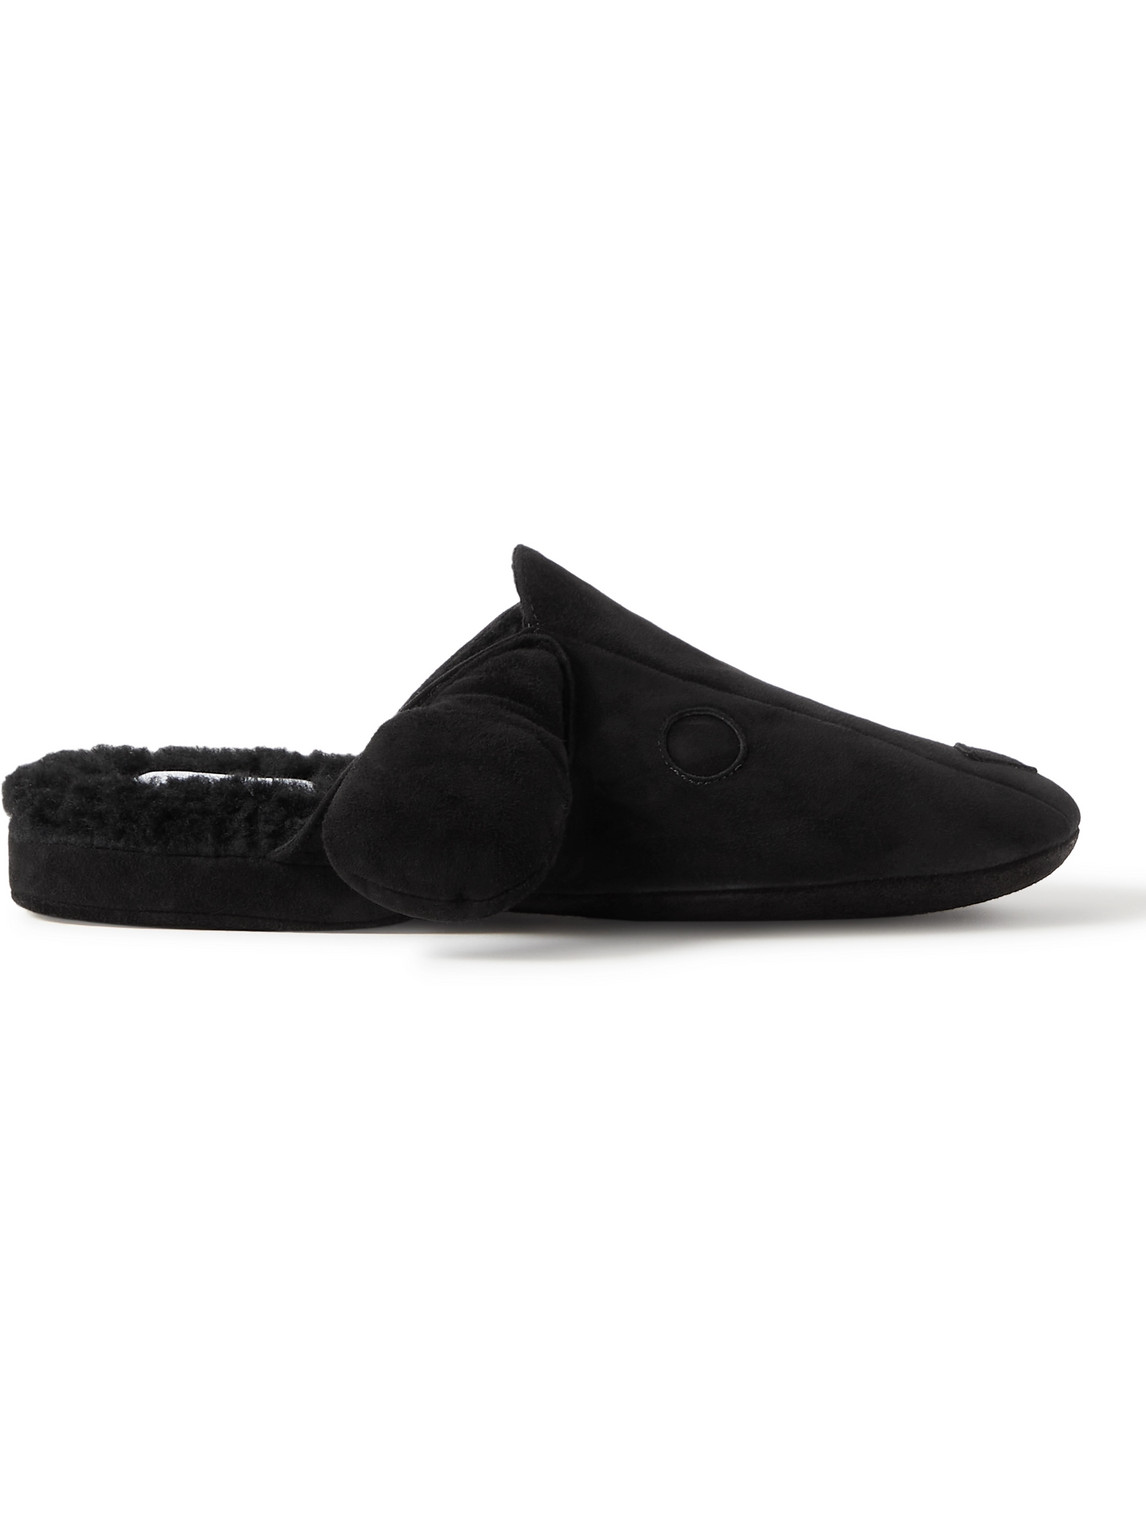 THOM BROWNE HECTOR SHEARLING-TRIMMED SUEDE SLIPPERS